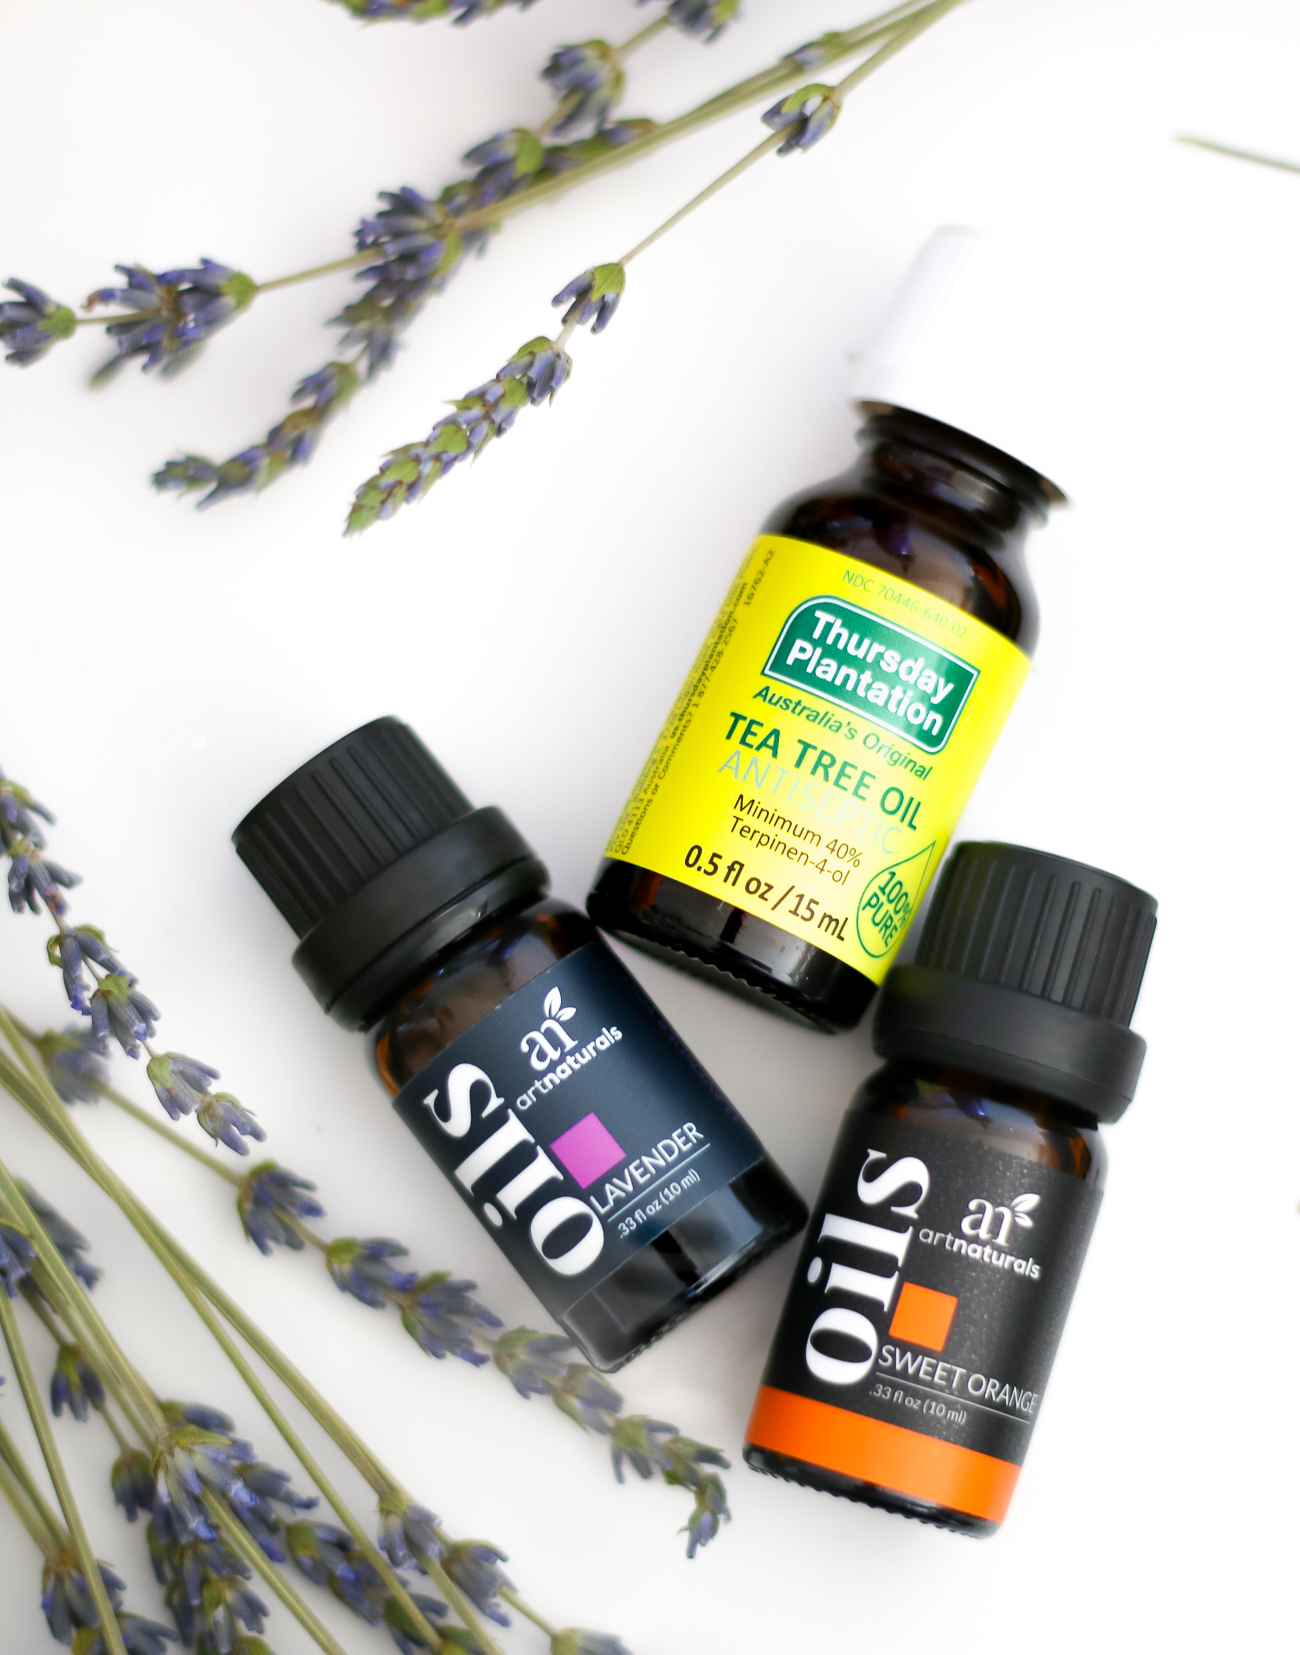 DIY essential oil linen spray by southern fashion blogger Stephanie Ziajka from Diary of a Debutante, DIY laundry spray with lavender, sweet orange, and tea tree oil from Thursday Plantation